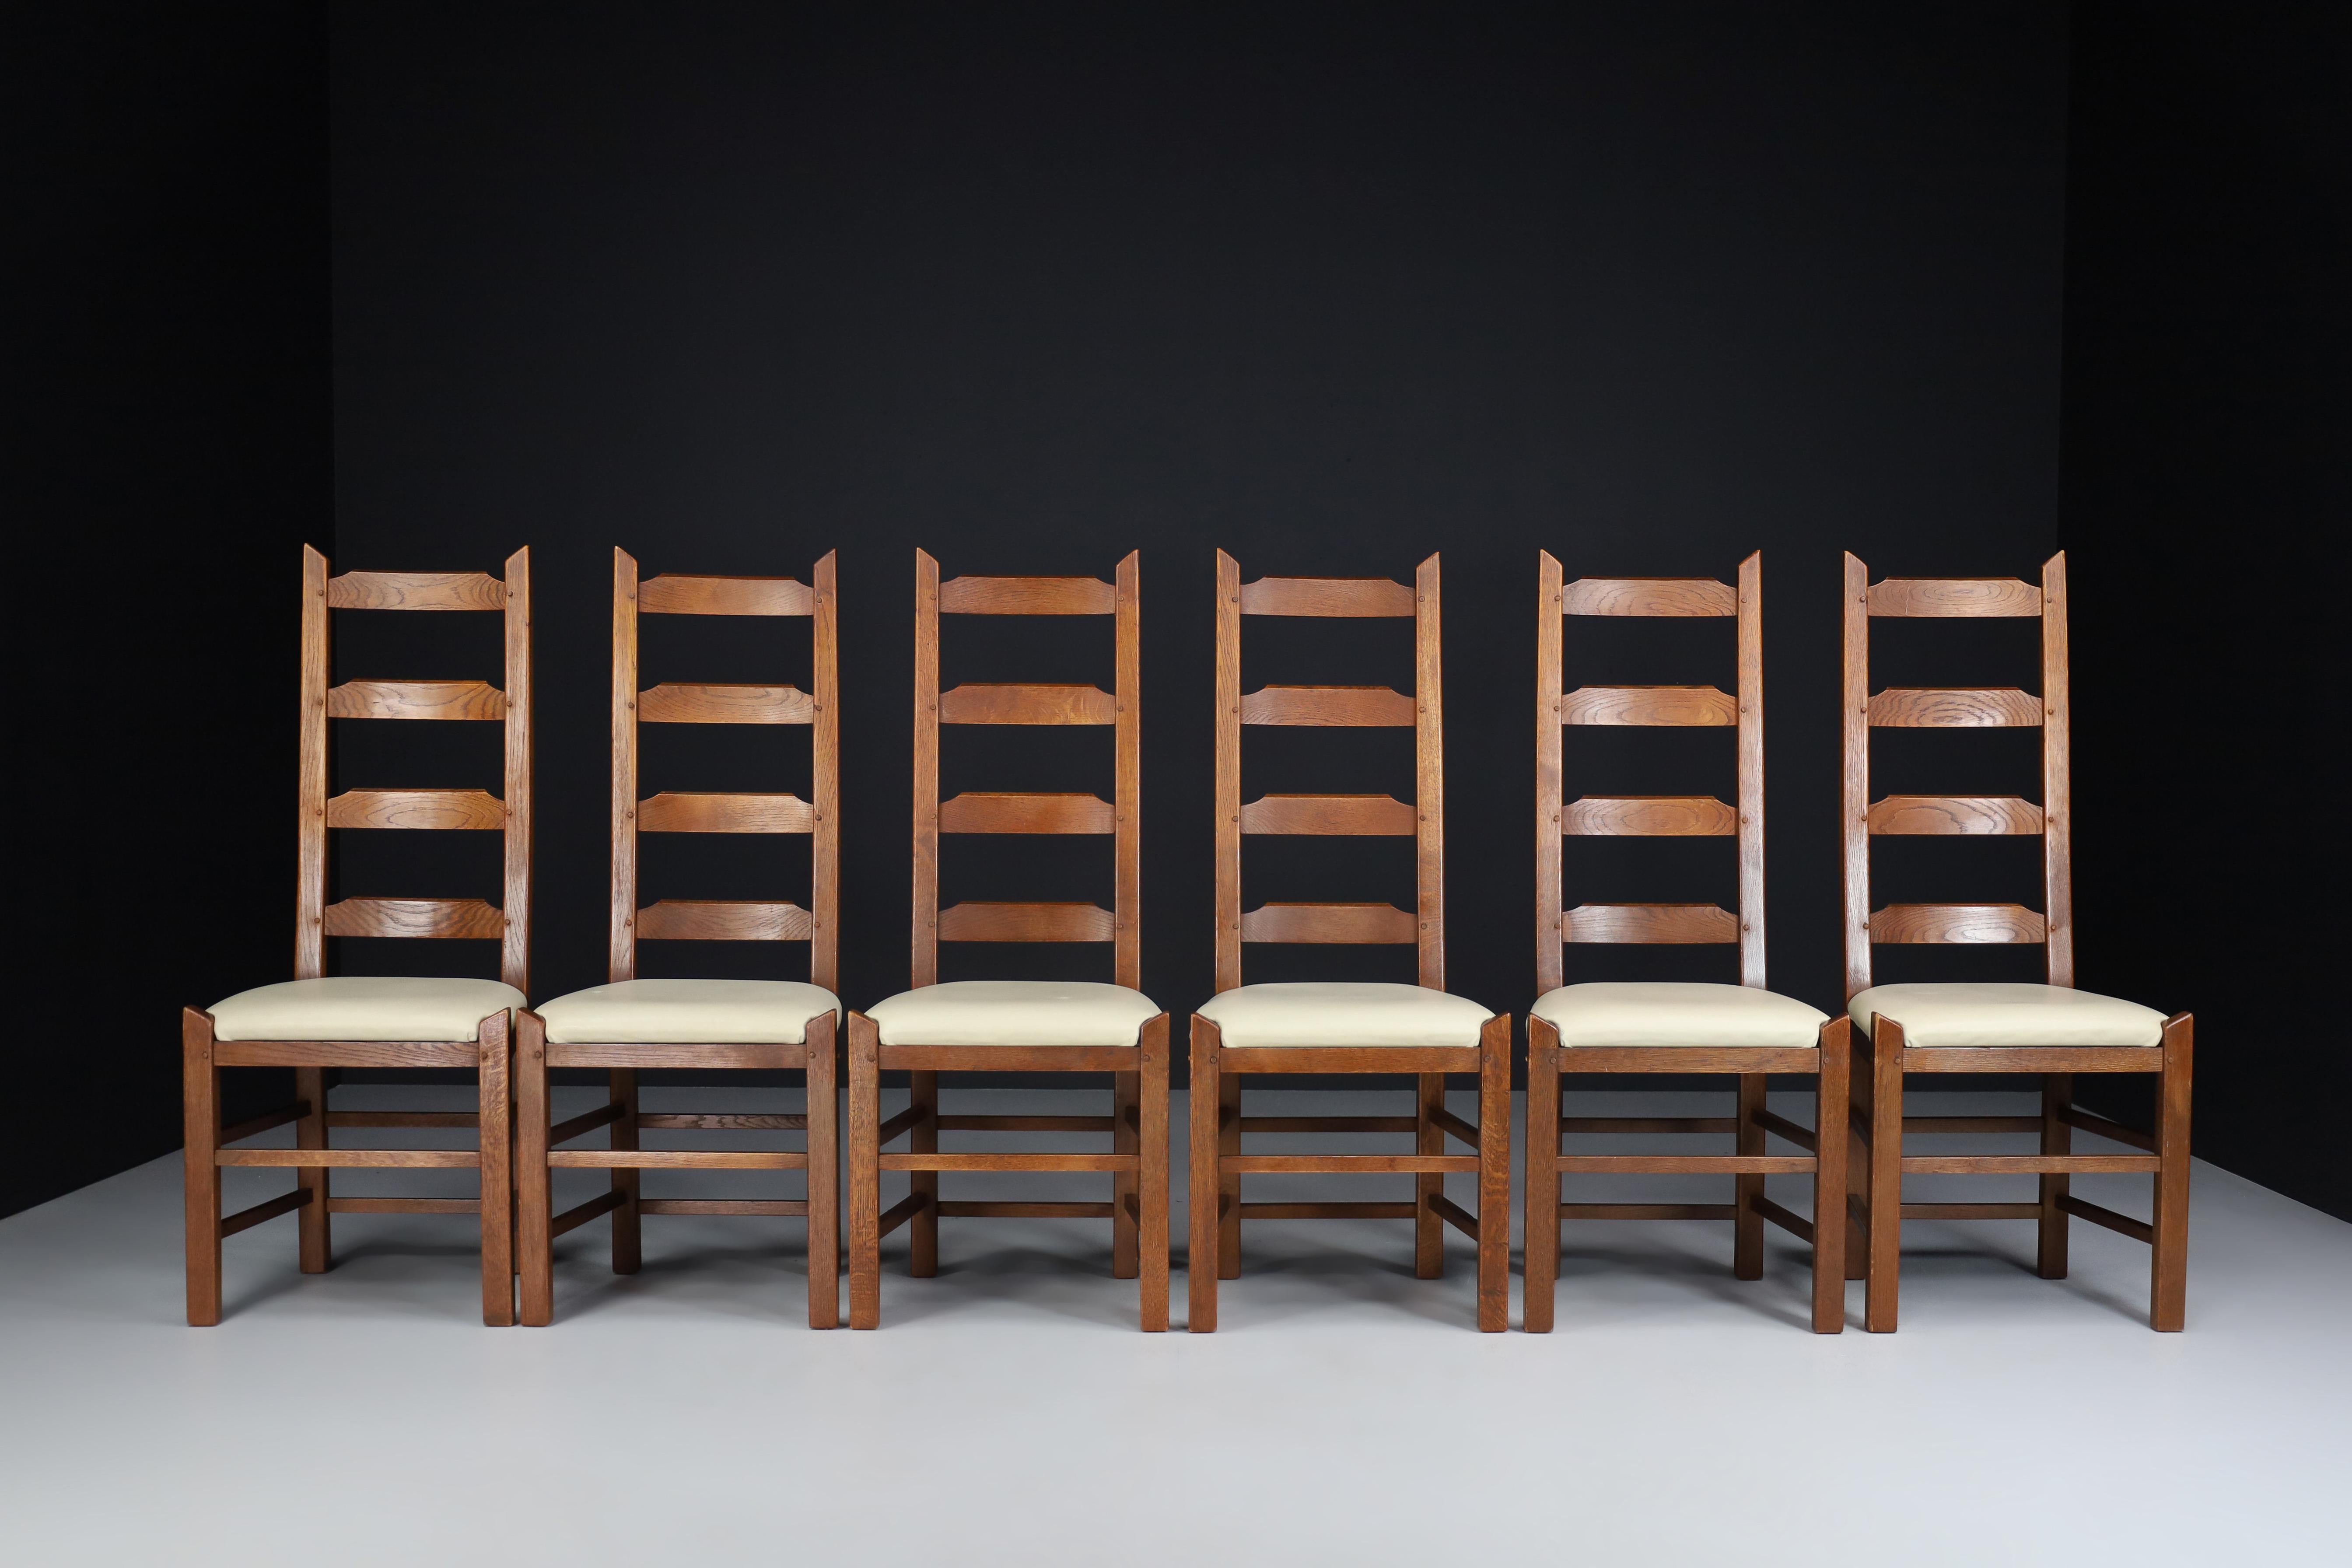 Ladder Back Chairs Crafted in Oak and Leather Seats, France, 1950s For Sale 3